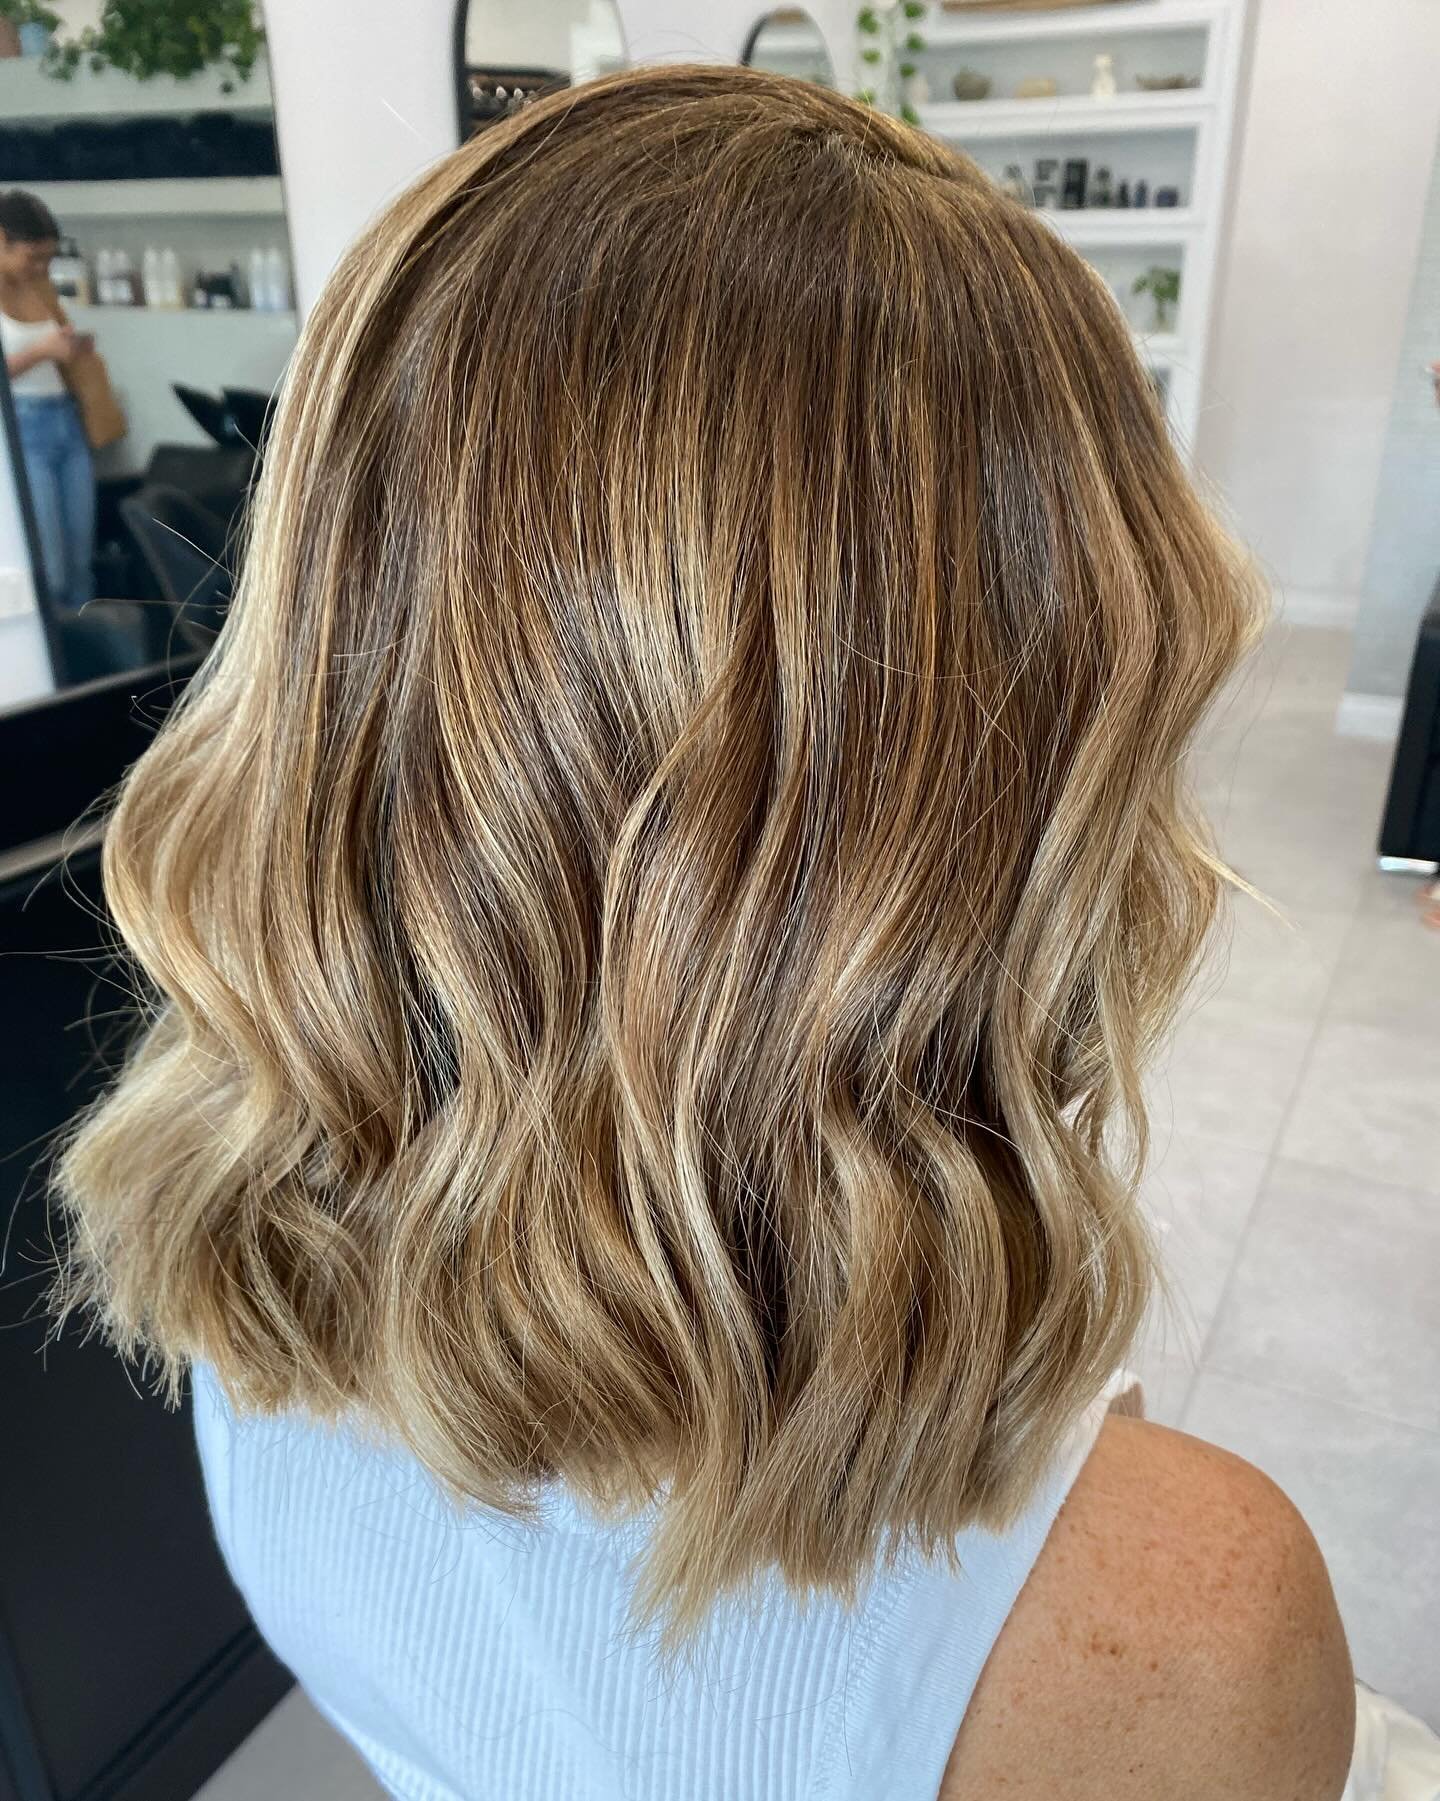 Creating dimension by adding low lights through your existing lighter ends, results in a much softer/natural look! 

This one is on one of our beautiful regulars -  by Lilly 💥